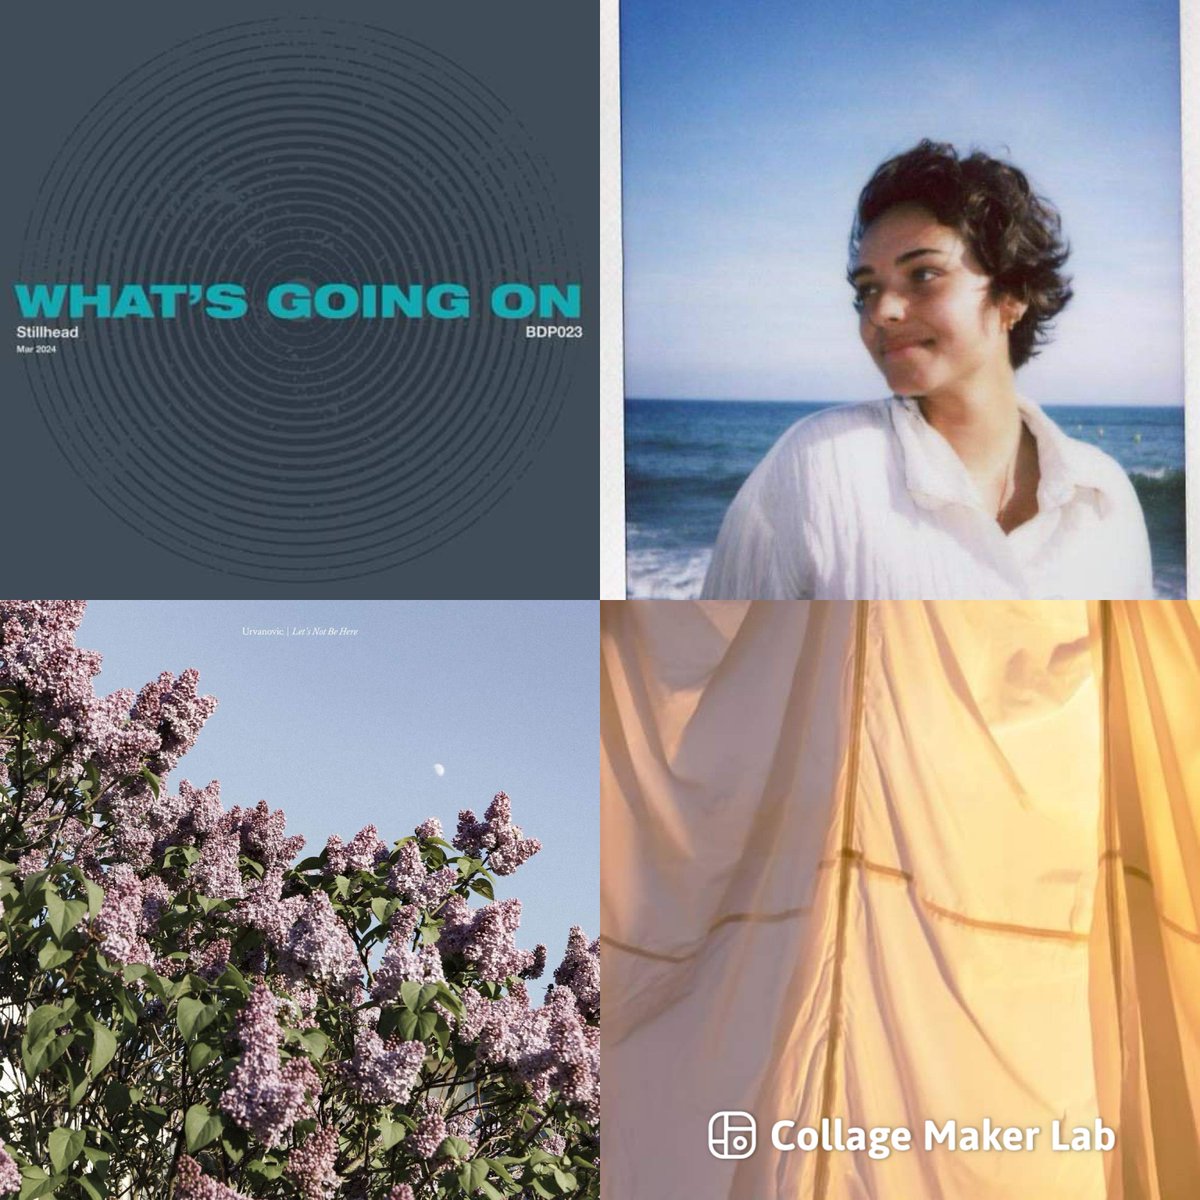 New tracks added to our Best New Scottish Music Playlist featuring: Stillhead - What's Going On [Brightest Dark Place] @tamzenee - What Sundays Are For @youngpoet Urvanovic - RAZE! Common Grounds/ @wastedstate naafi - UVA open.spotify.com/playlist/5vorH…